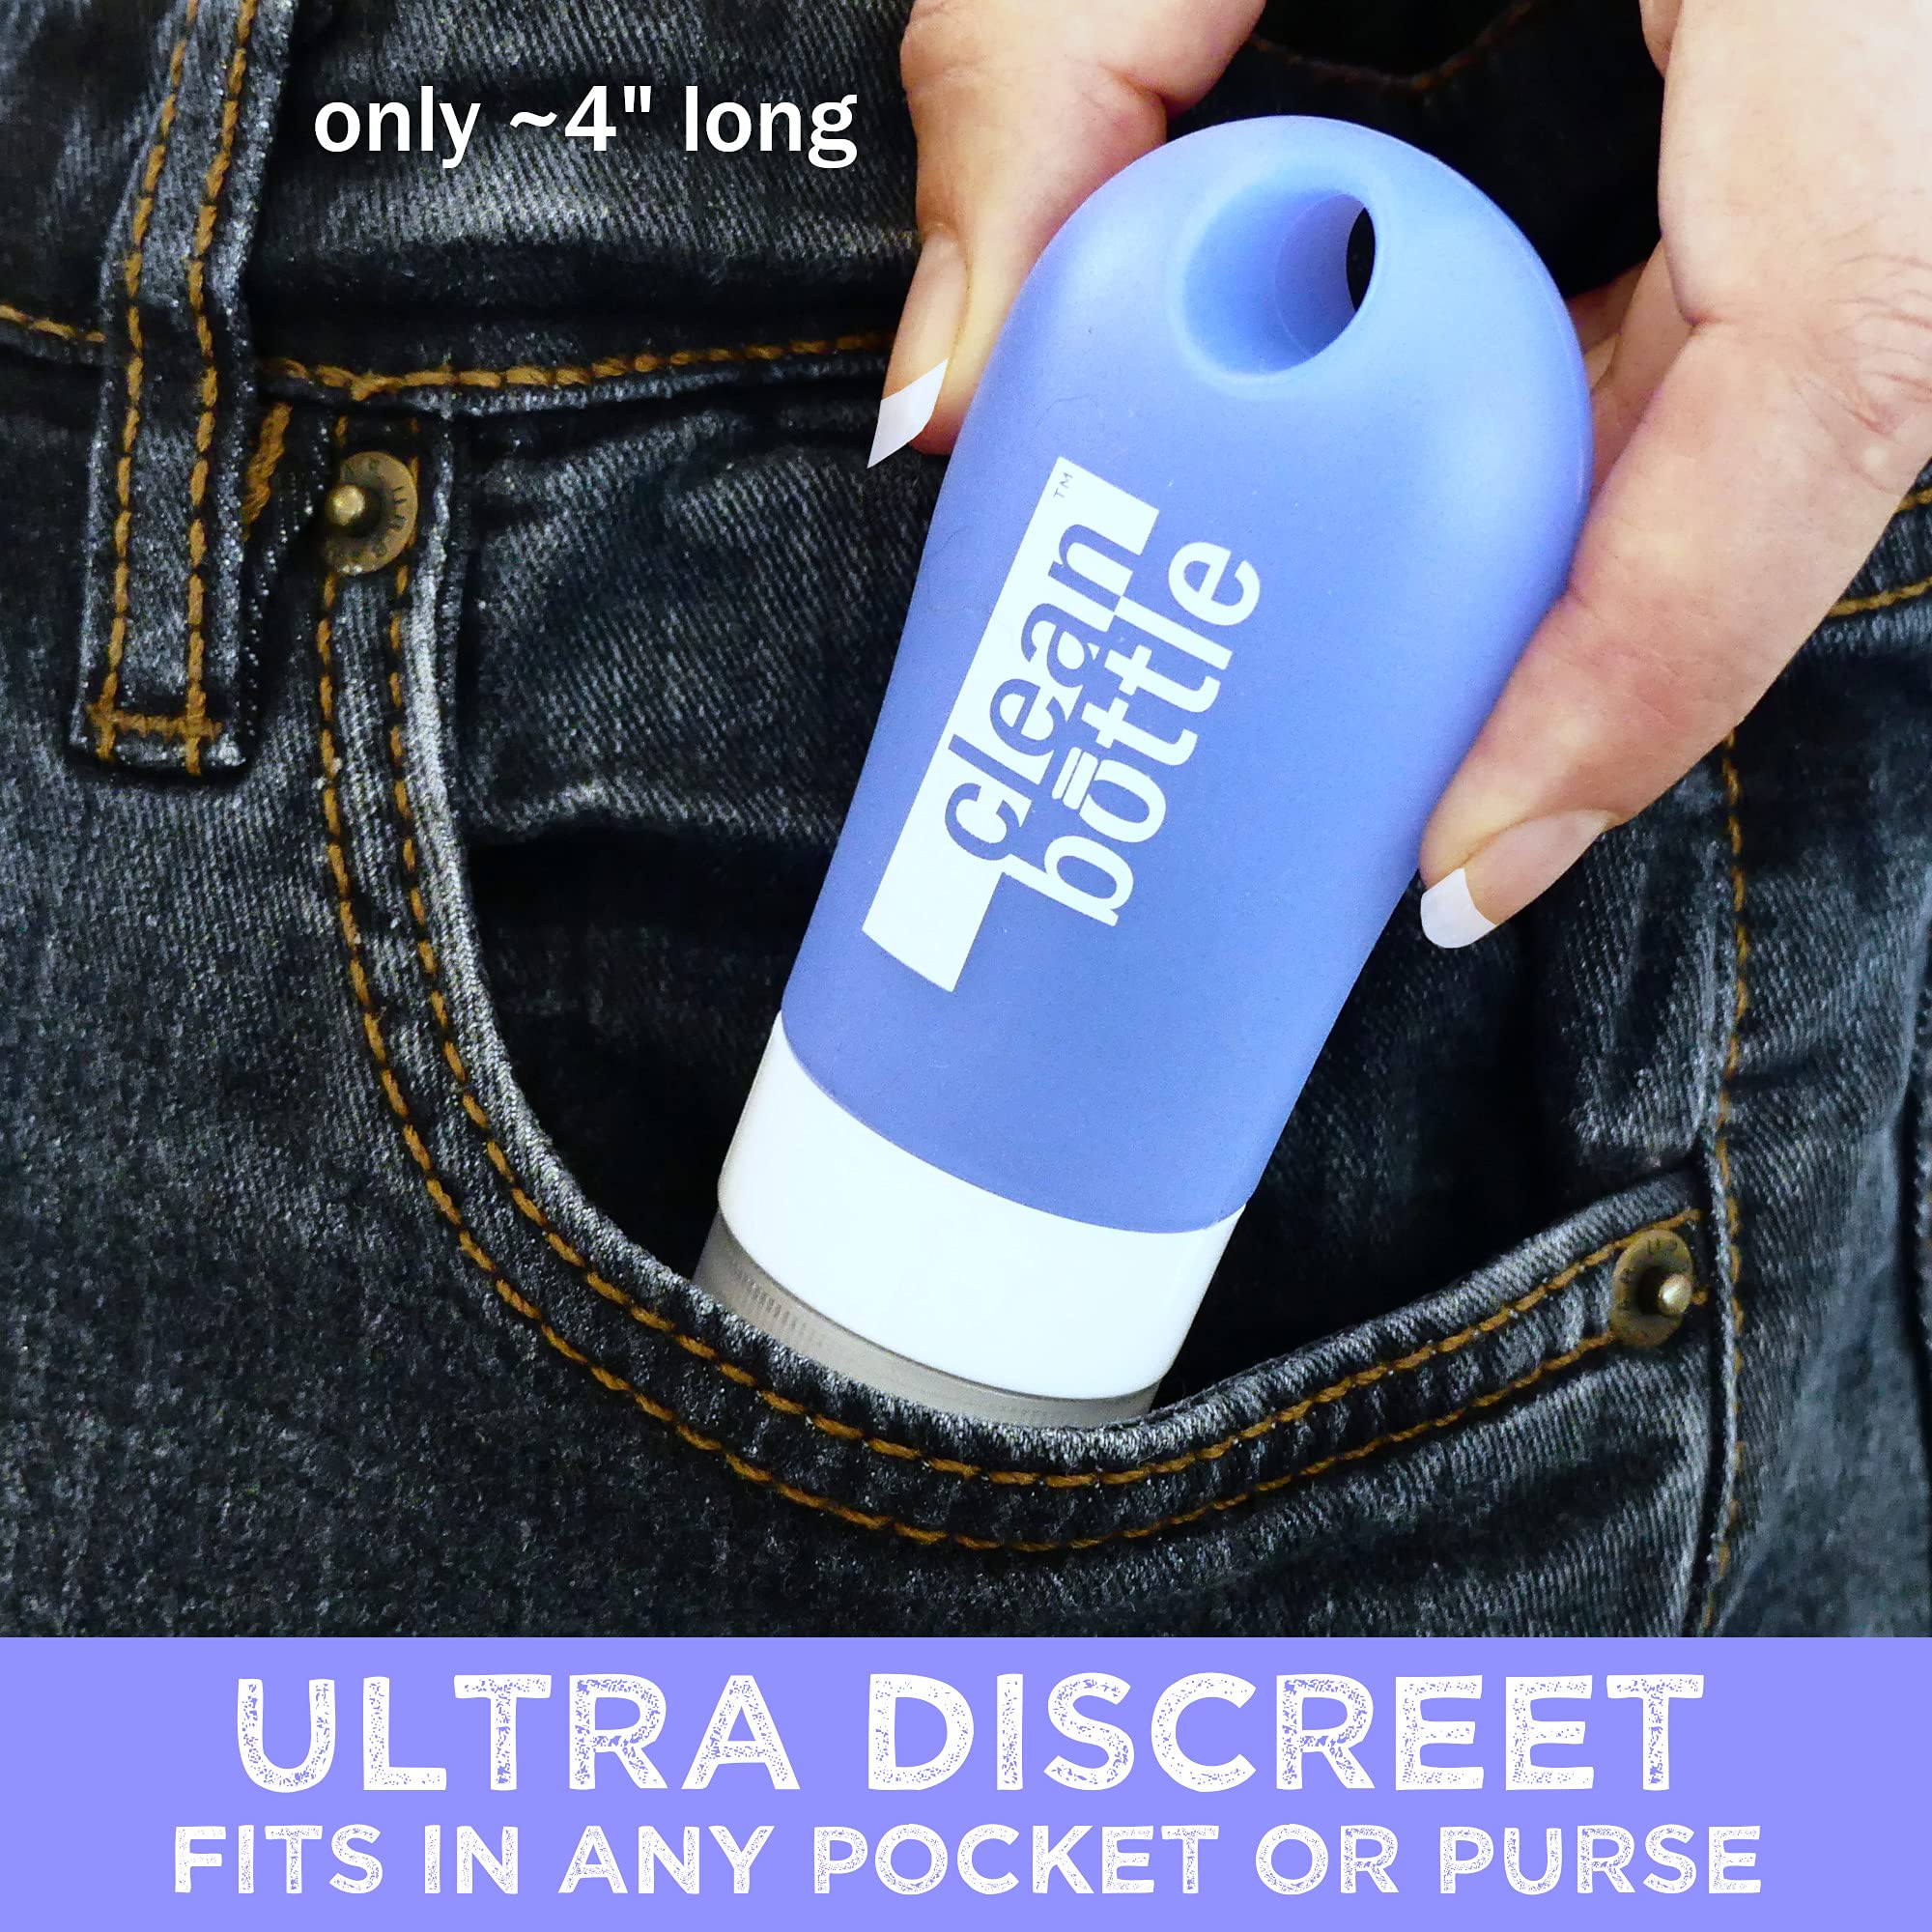 CleanButtle Travel Bidet – Your Ultra Discreet Portable Bidet On The Go – CleanButtle Gets Your Butt’le Clean (Blue) Personal Handheld Water Sprayer